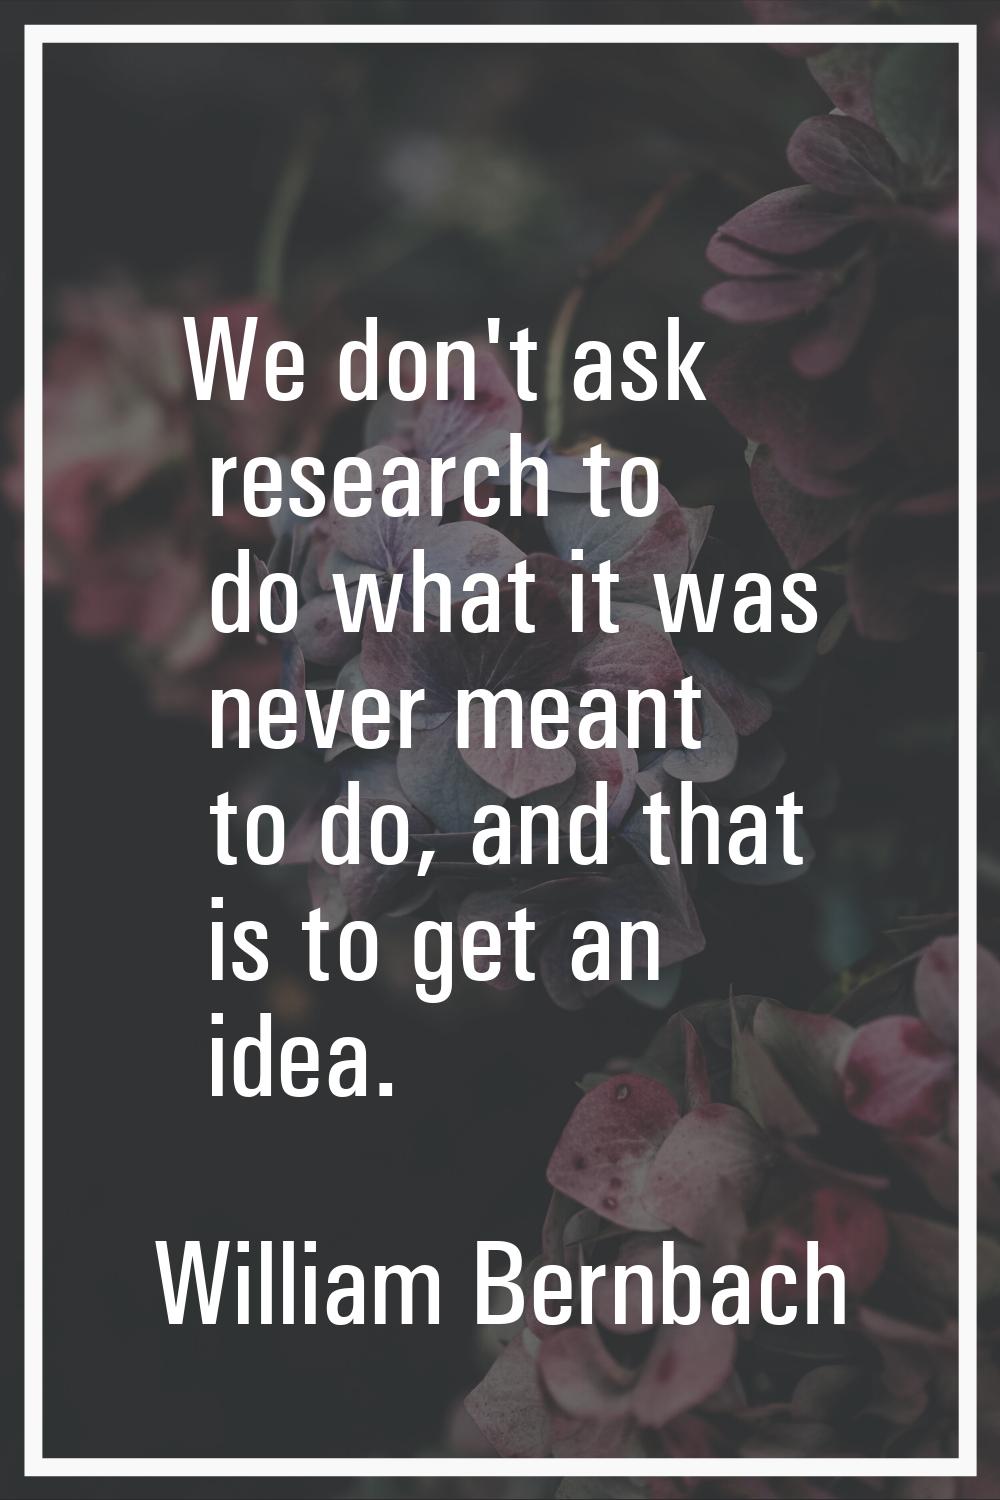 We don't ask research to do what it was never meant to do, and that is to get an idea.